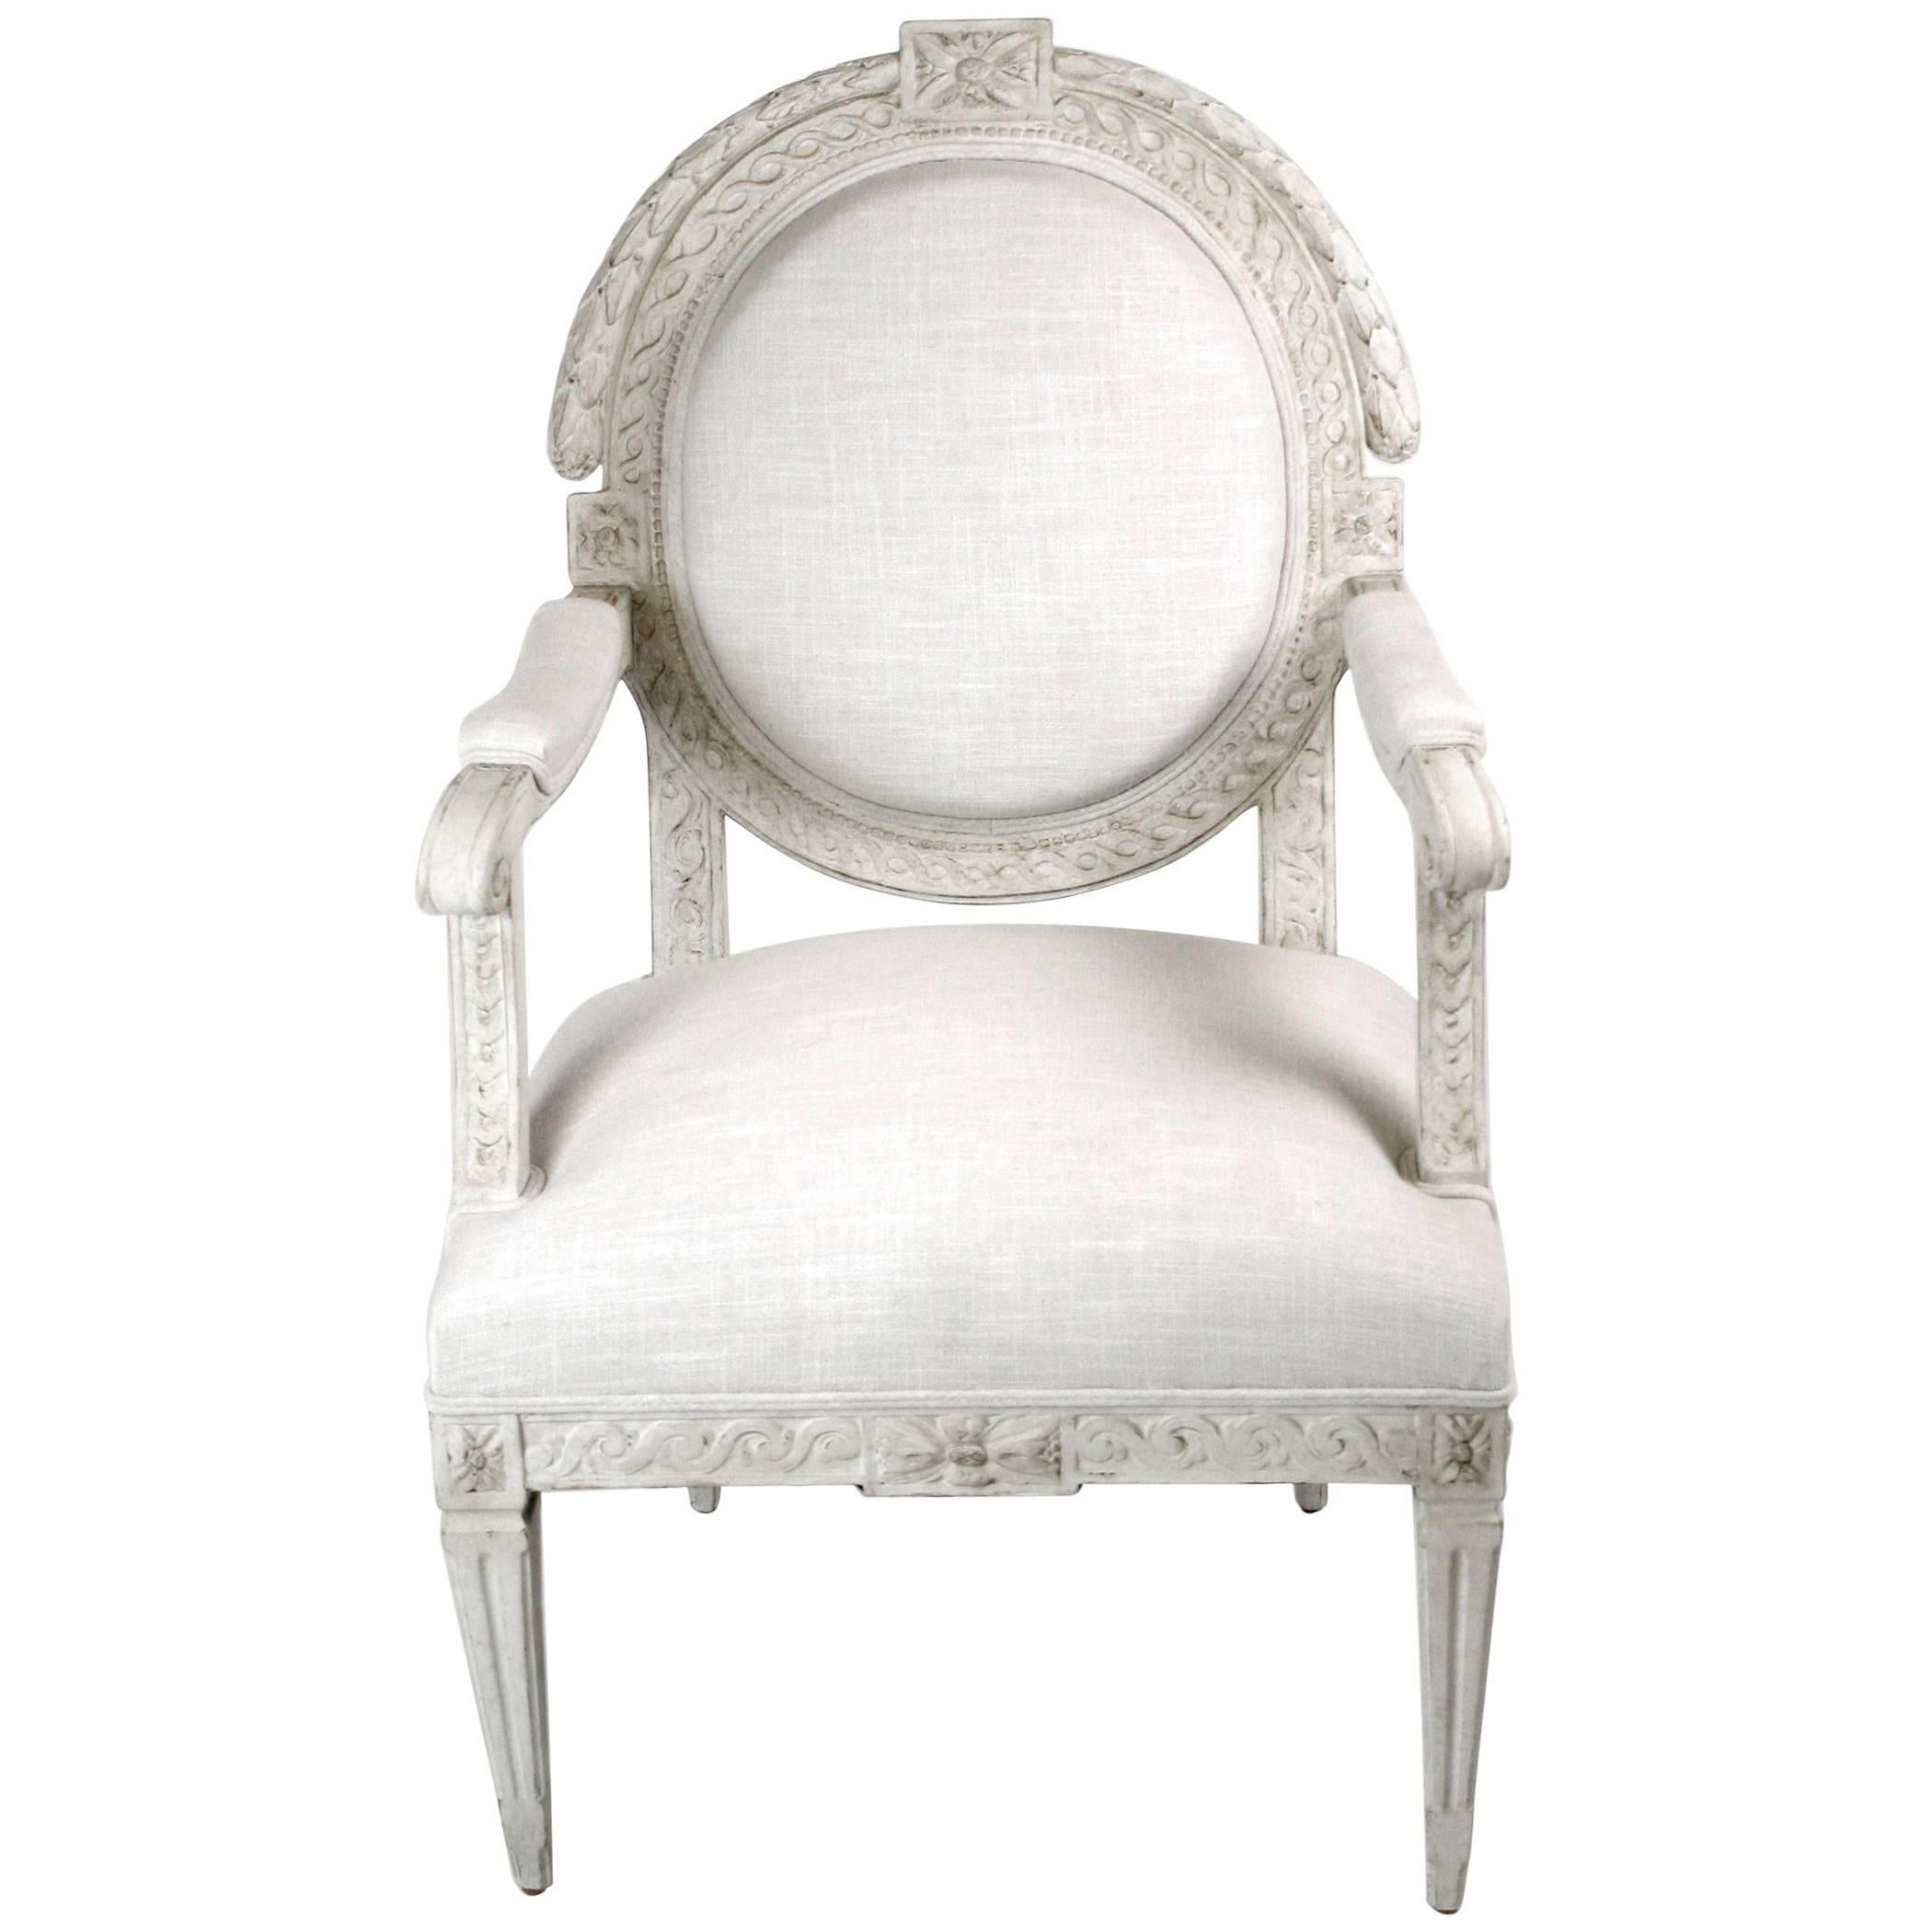 Late 19th Century French Louis XVI Fauteuil